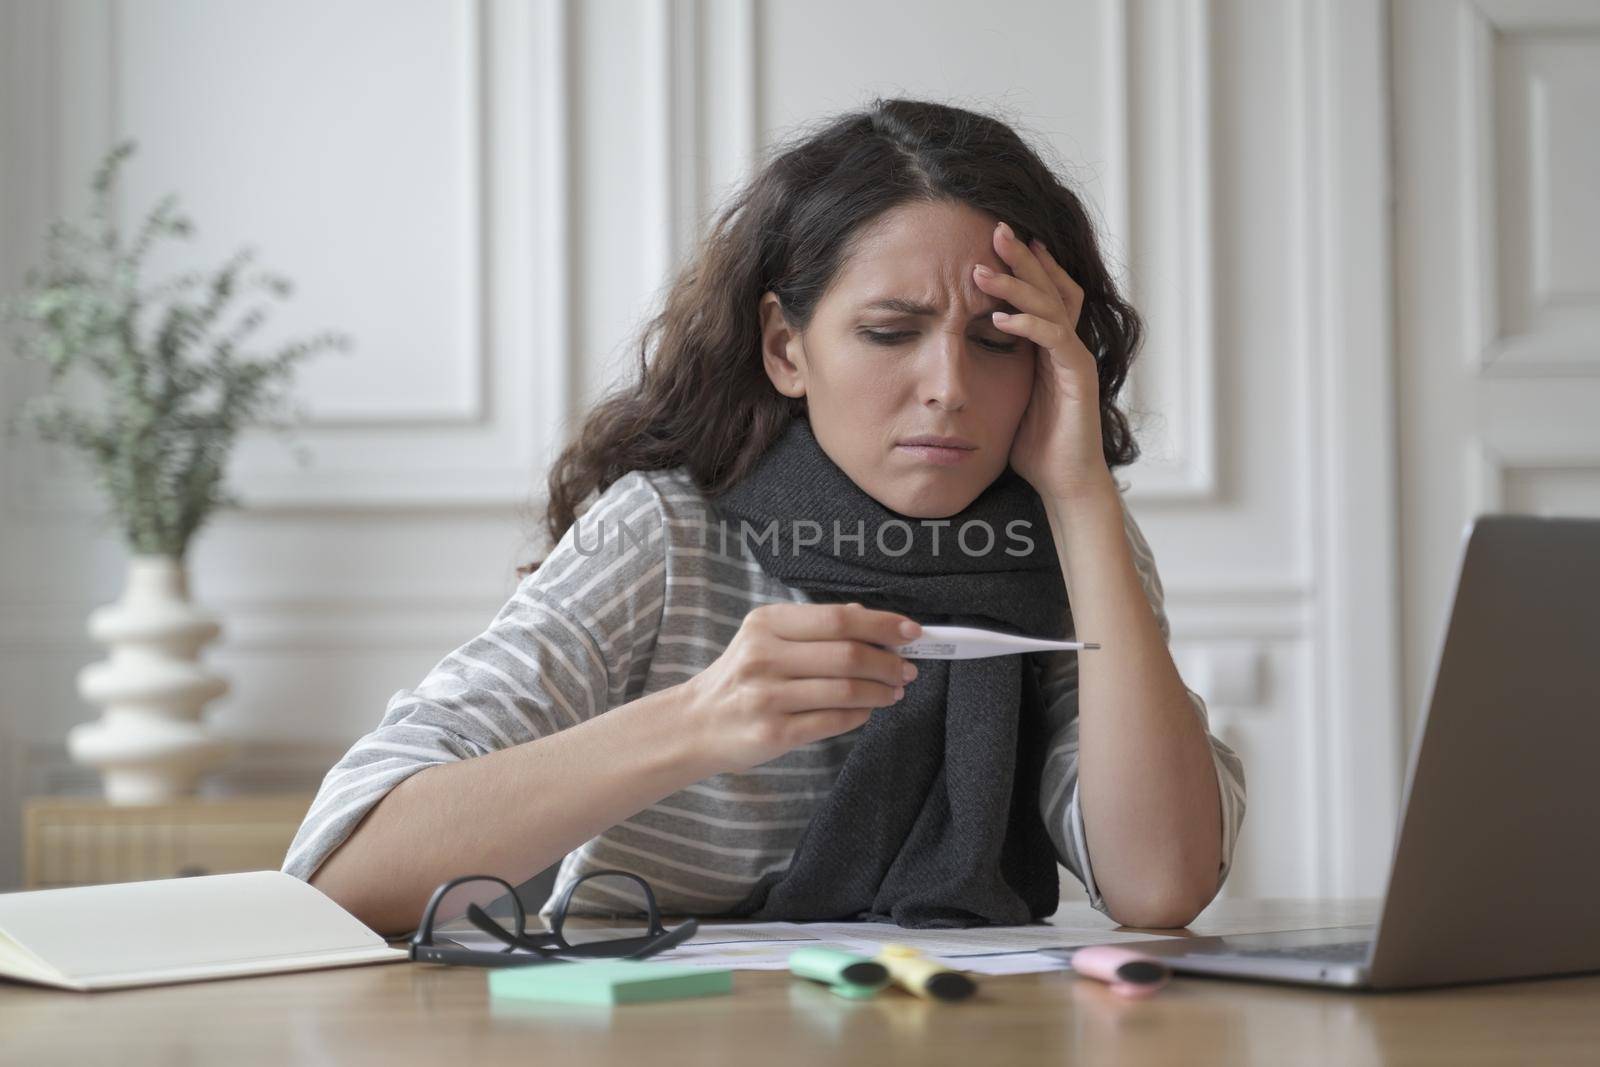 Unhealthy italian woman wrapped in warm knitted scarf looking anxiously on digital thermometer in her hand, weak entrepreneur sitting at workplace at home with laptop, suffering from fever or flu